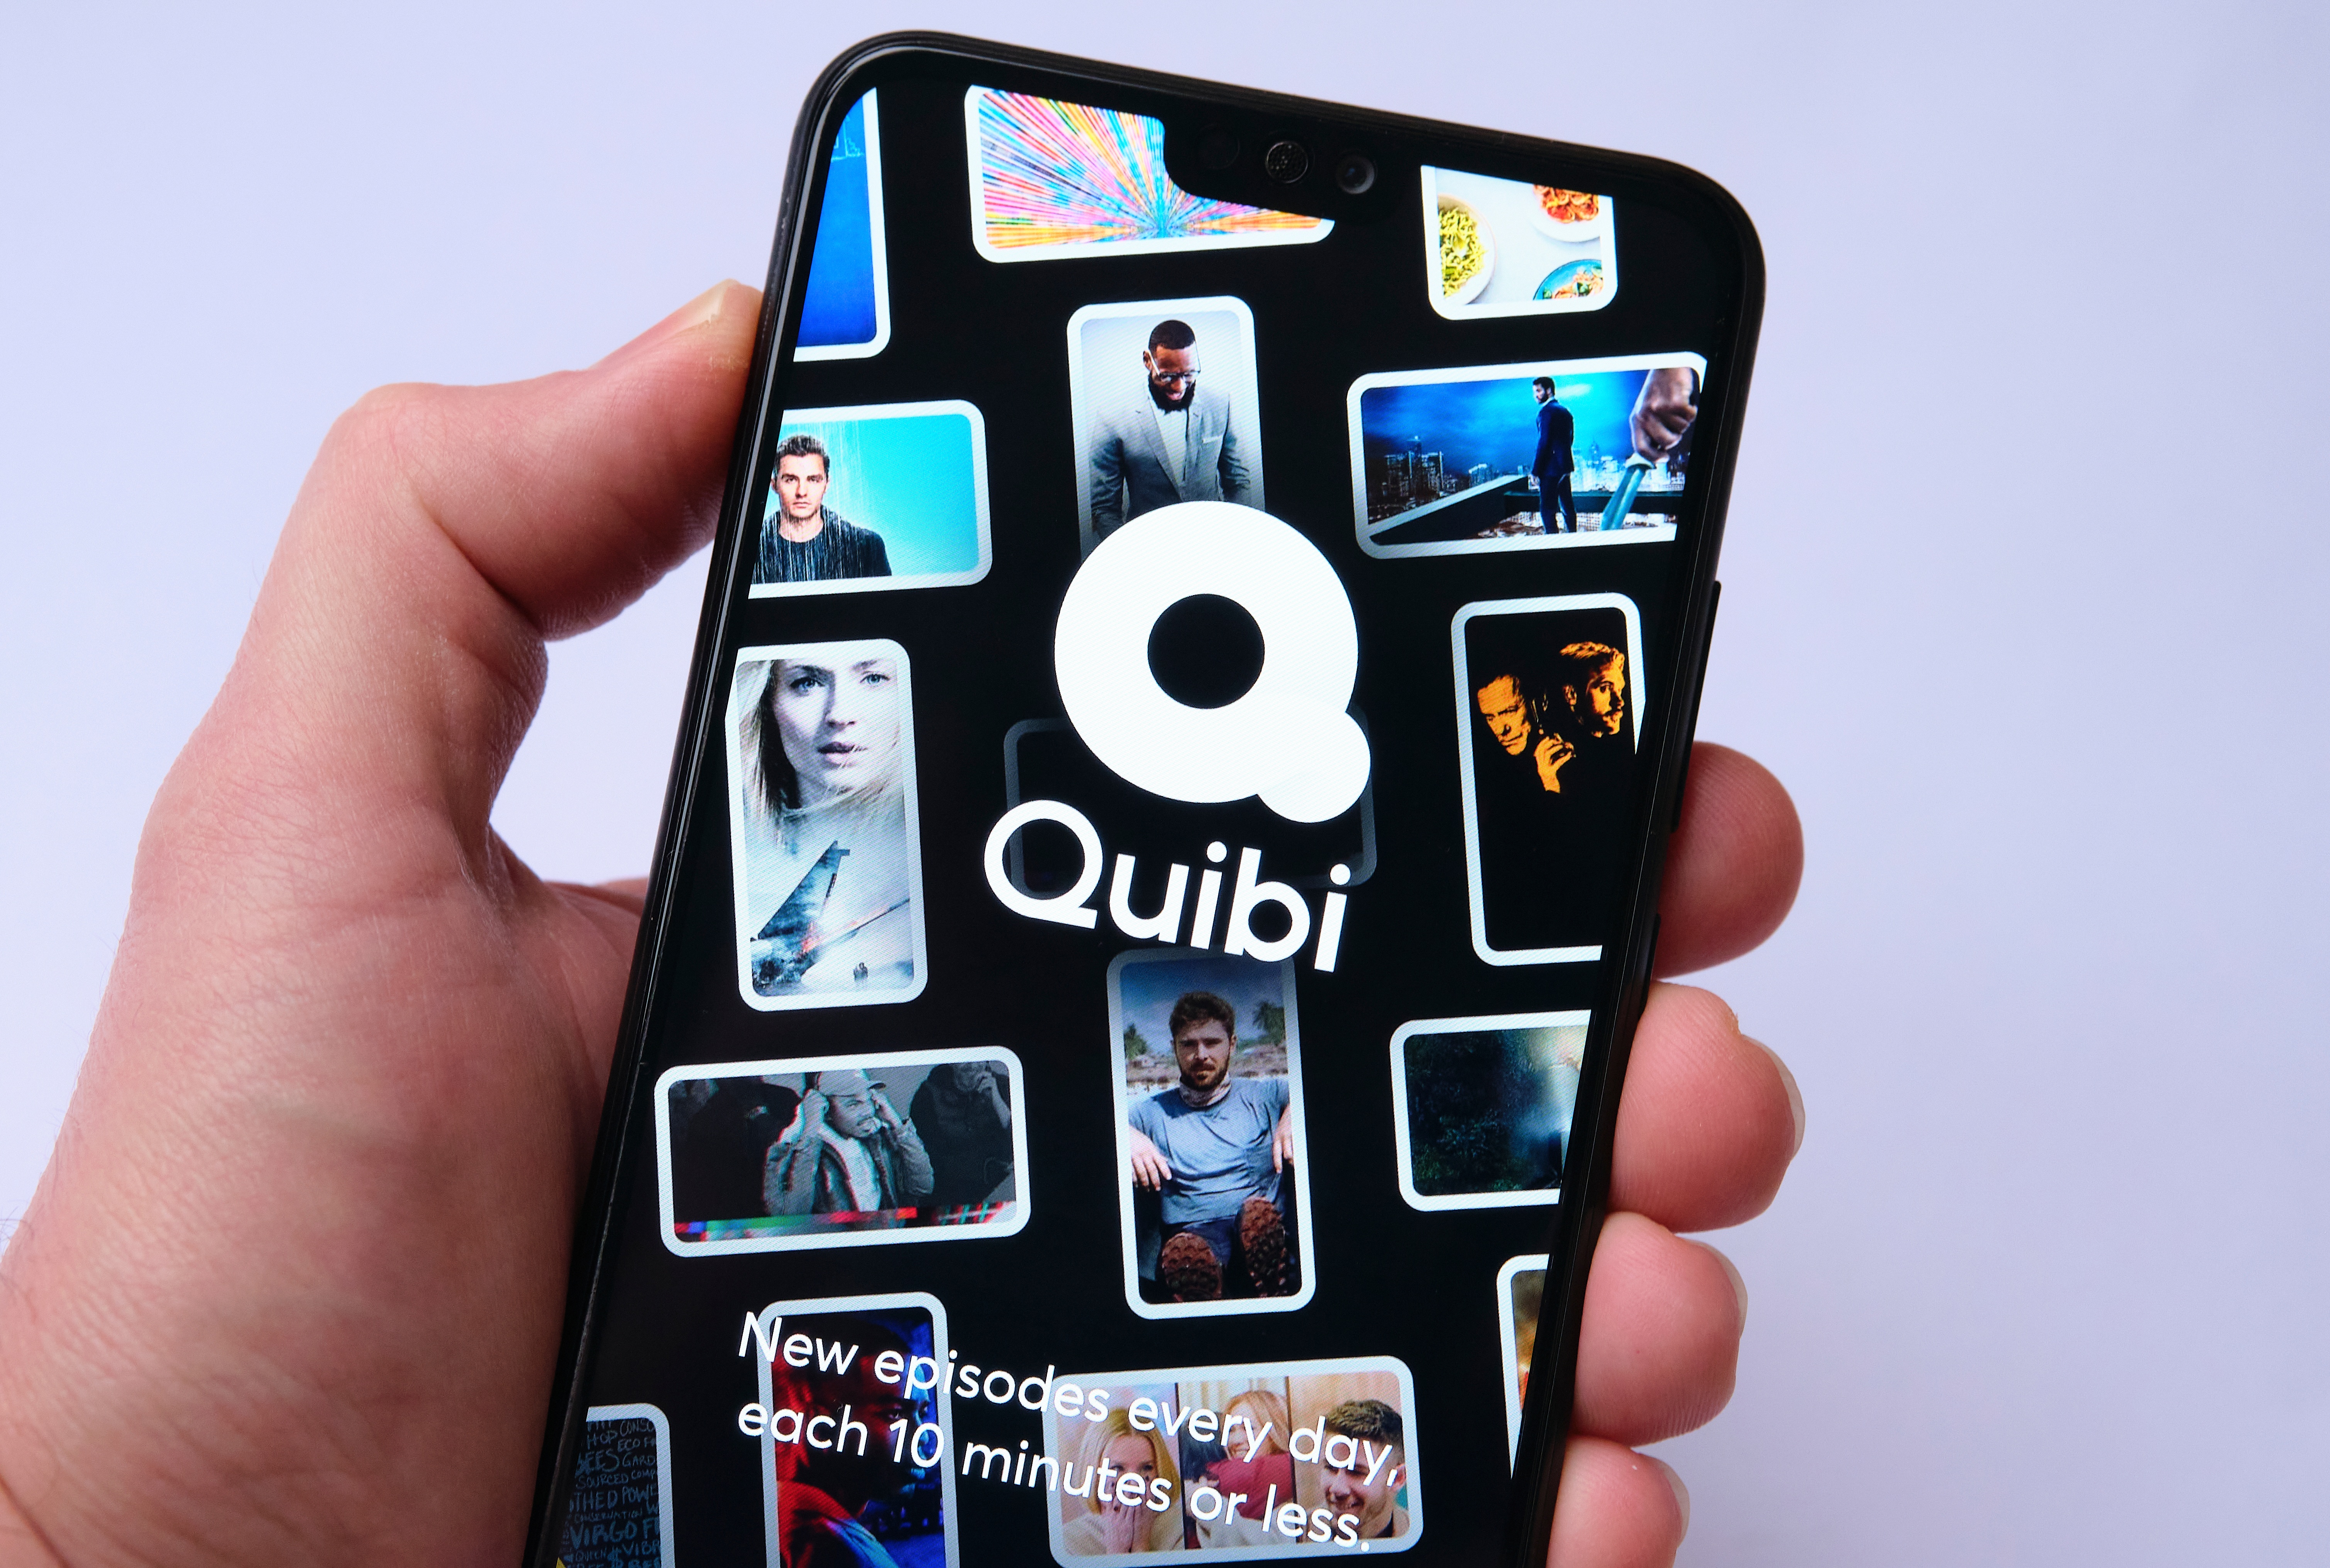 Quibi’s Turnstyle Tech Wasn’t Part of the Roku Deal and is Still Facing a Lawsuit